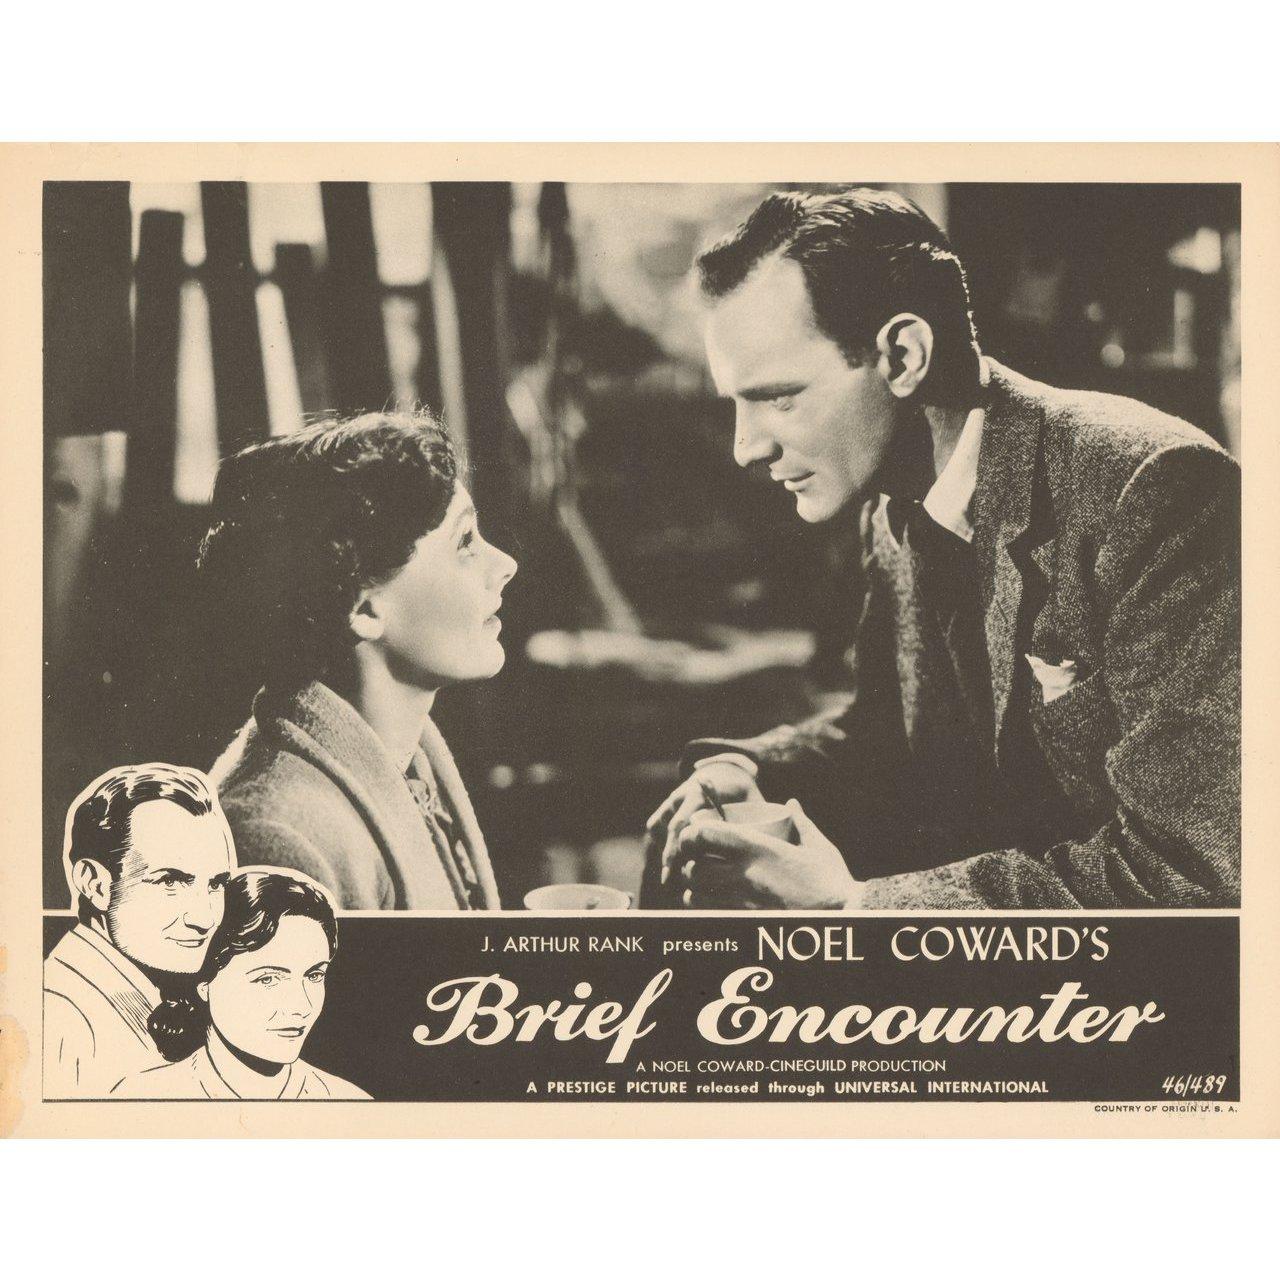 Original 1946 U.S. scene card for the film Brief Encounter directed by David Lean with Celia Johnson / Trevor Howard / Stanley Holloway / Joyce Carey. Very good-fine condition. Please note: the size is stated in inches and the actual size can vary